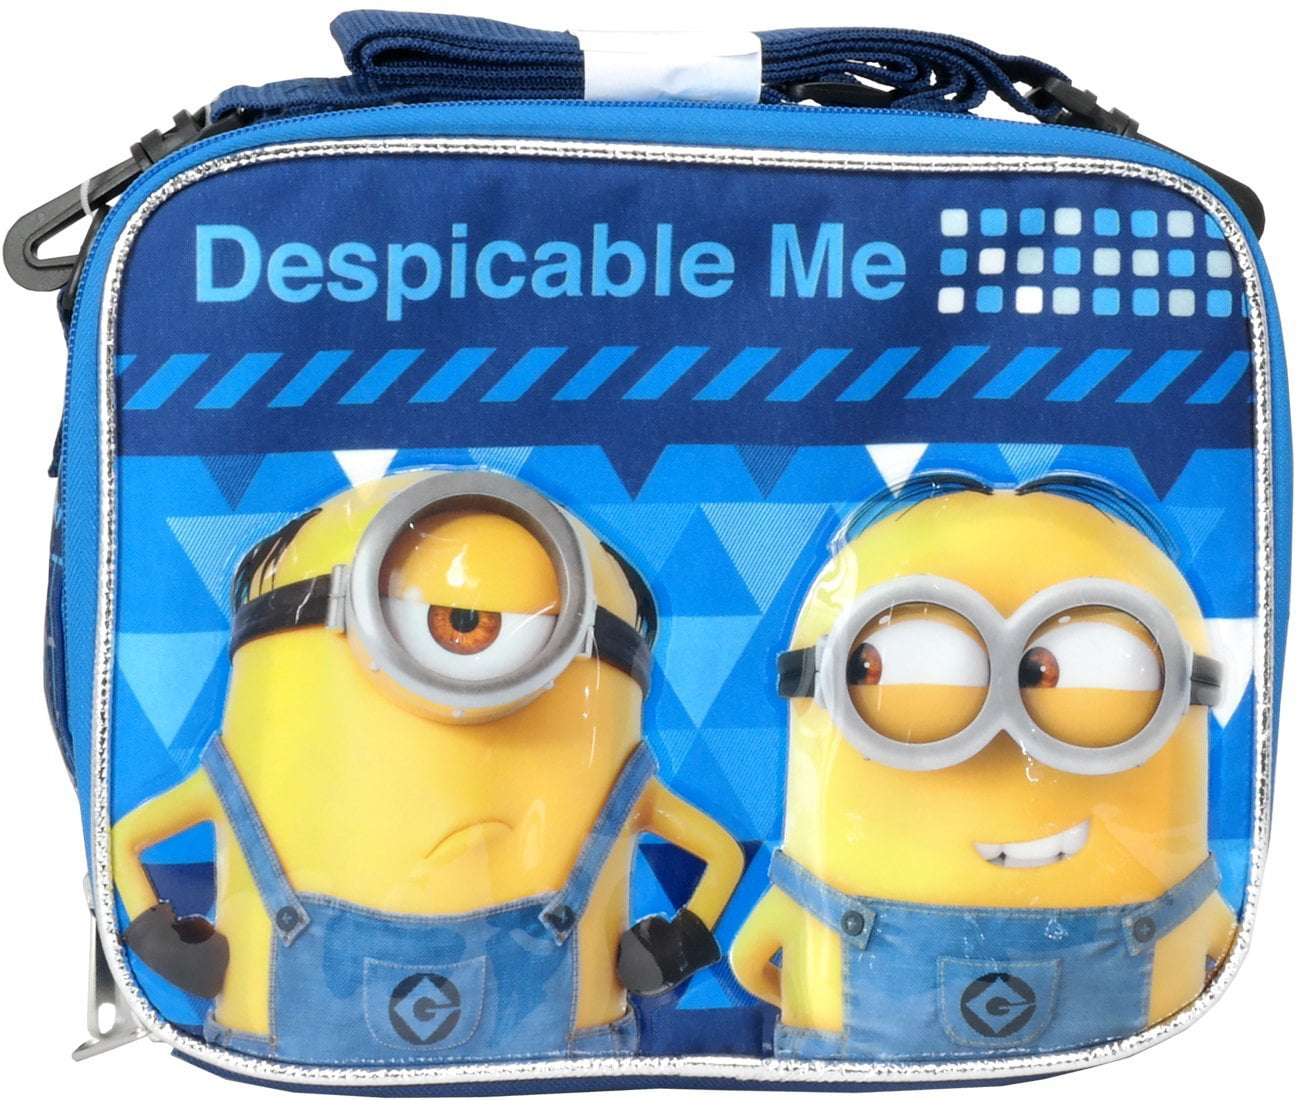 St366-3d Lunch Bag With Bottle Box Thermal Drink Set Despicable Minions 